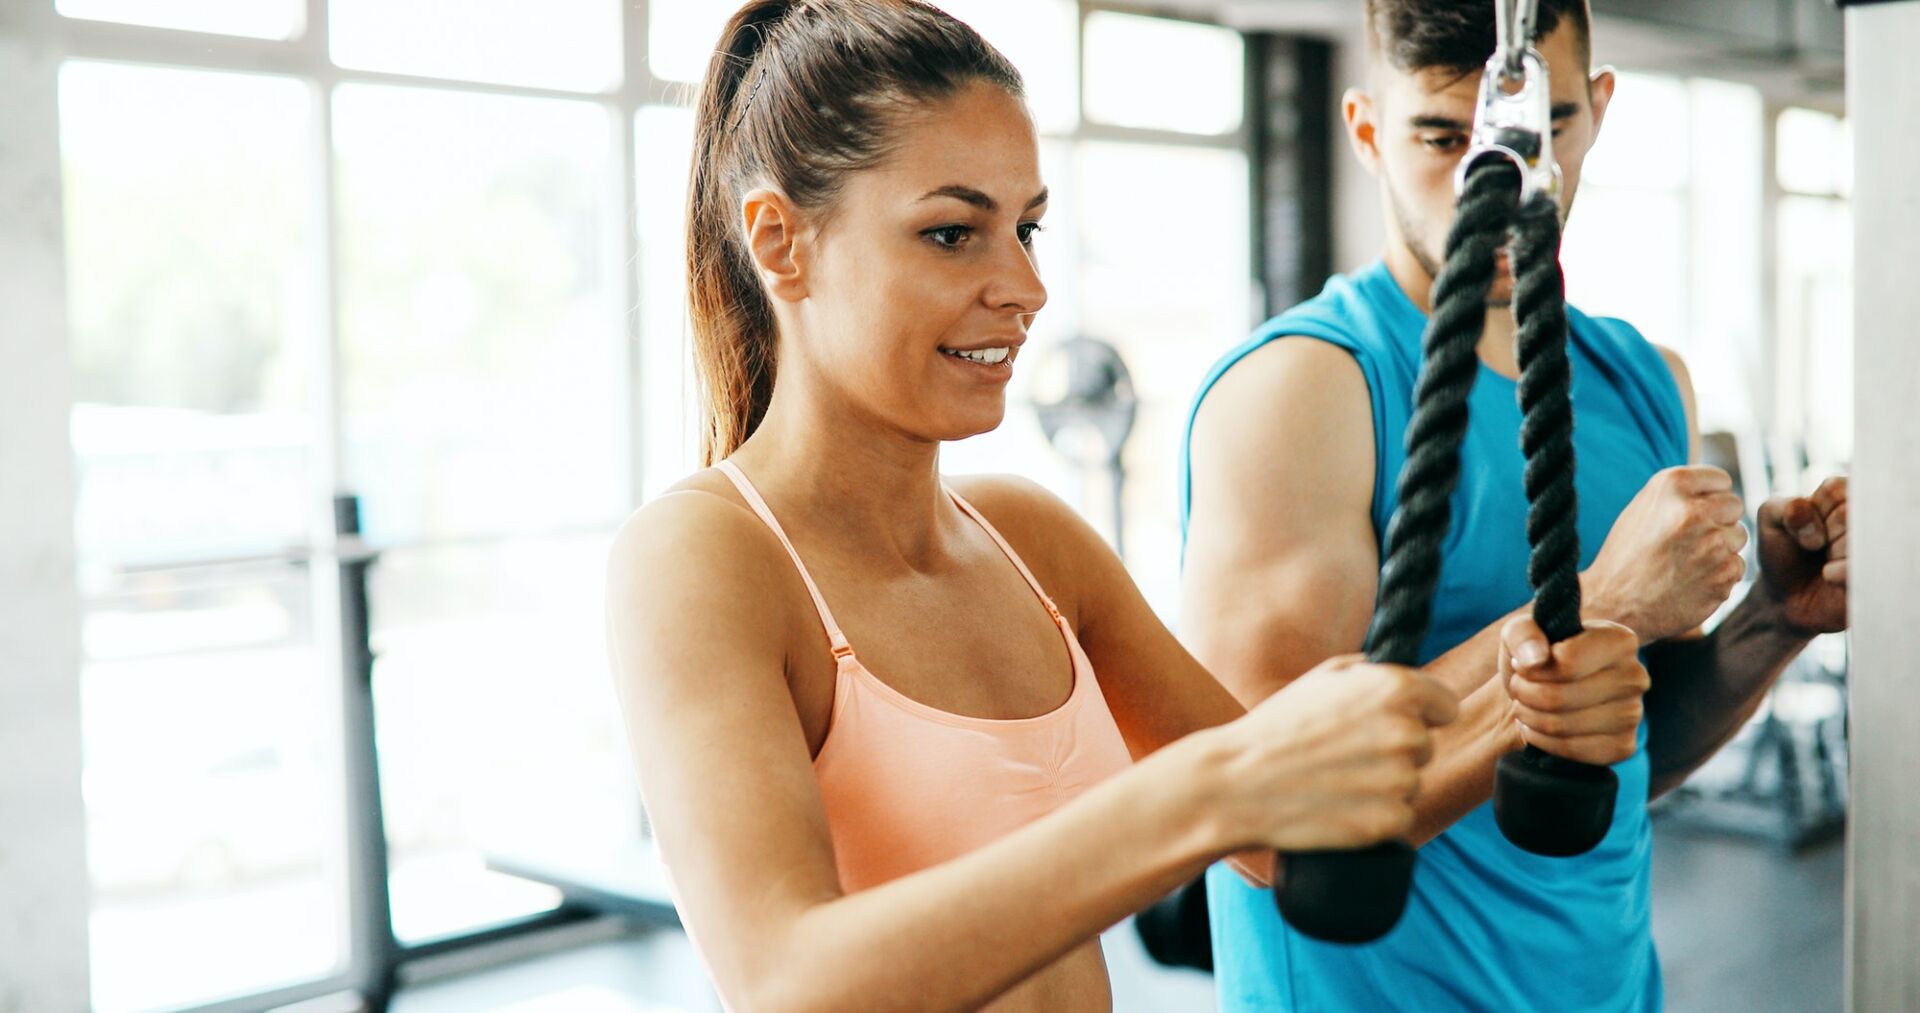 Personal trainer helping fit woman in gym